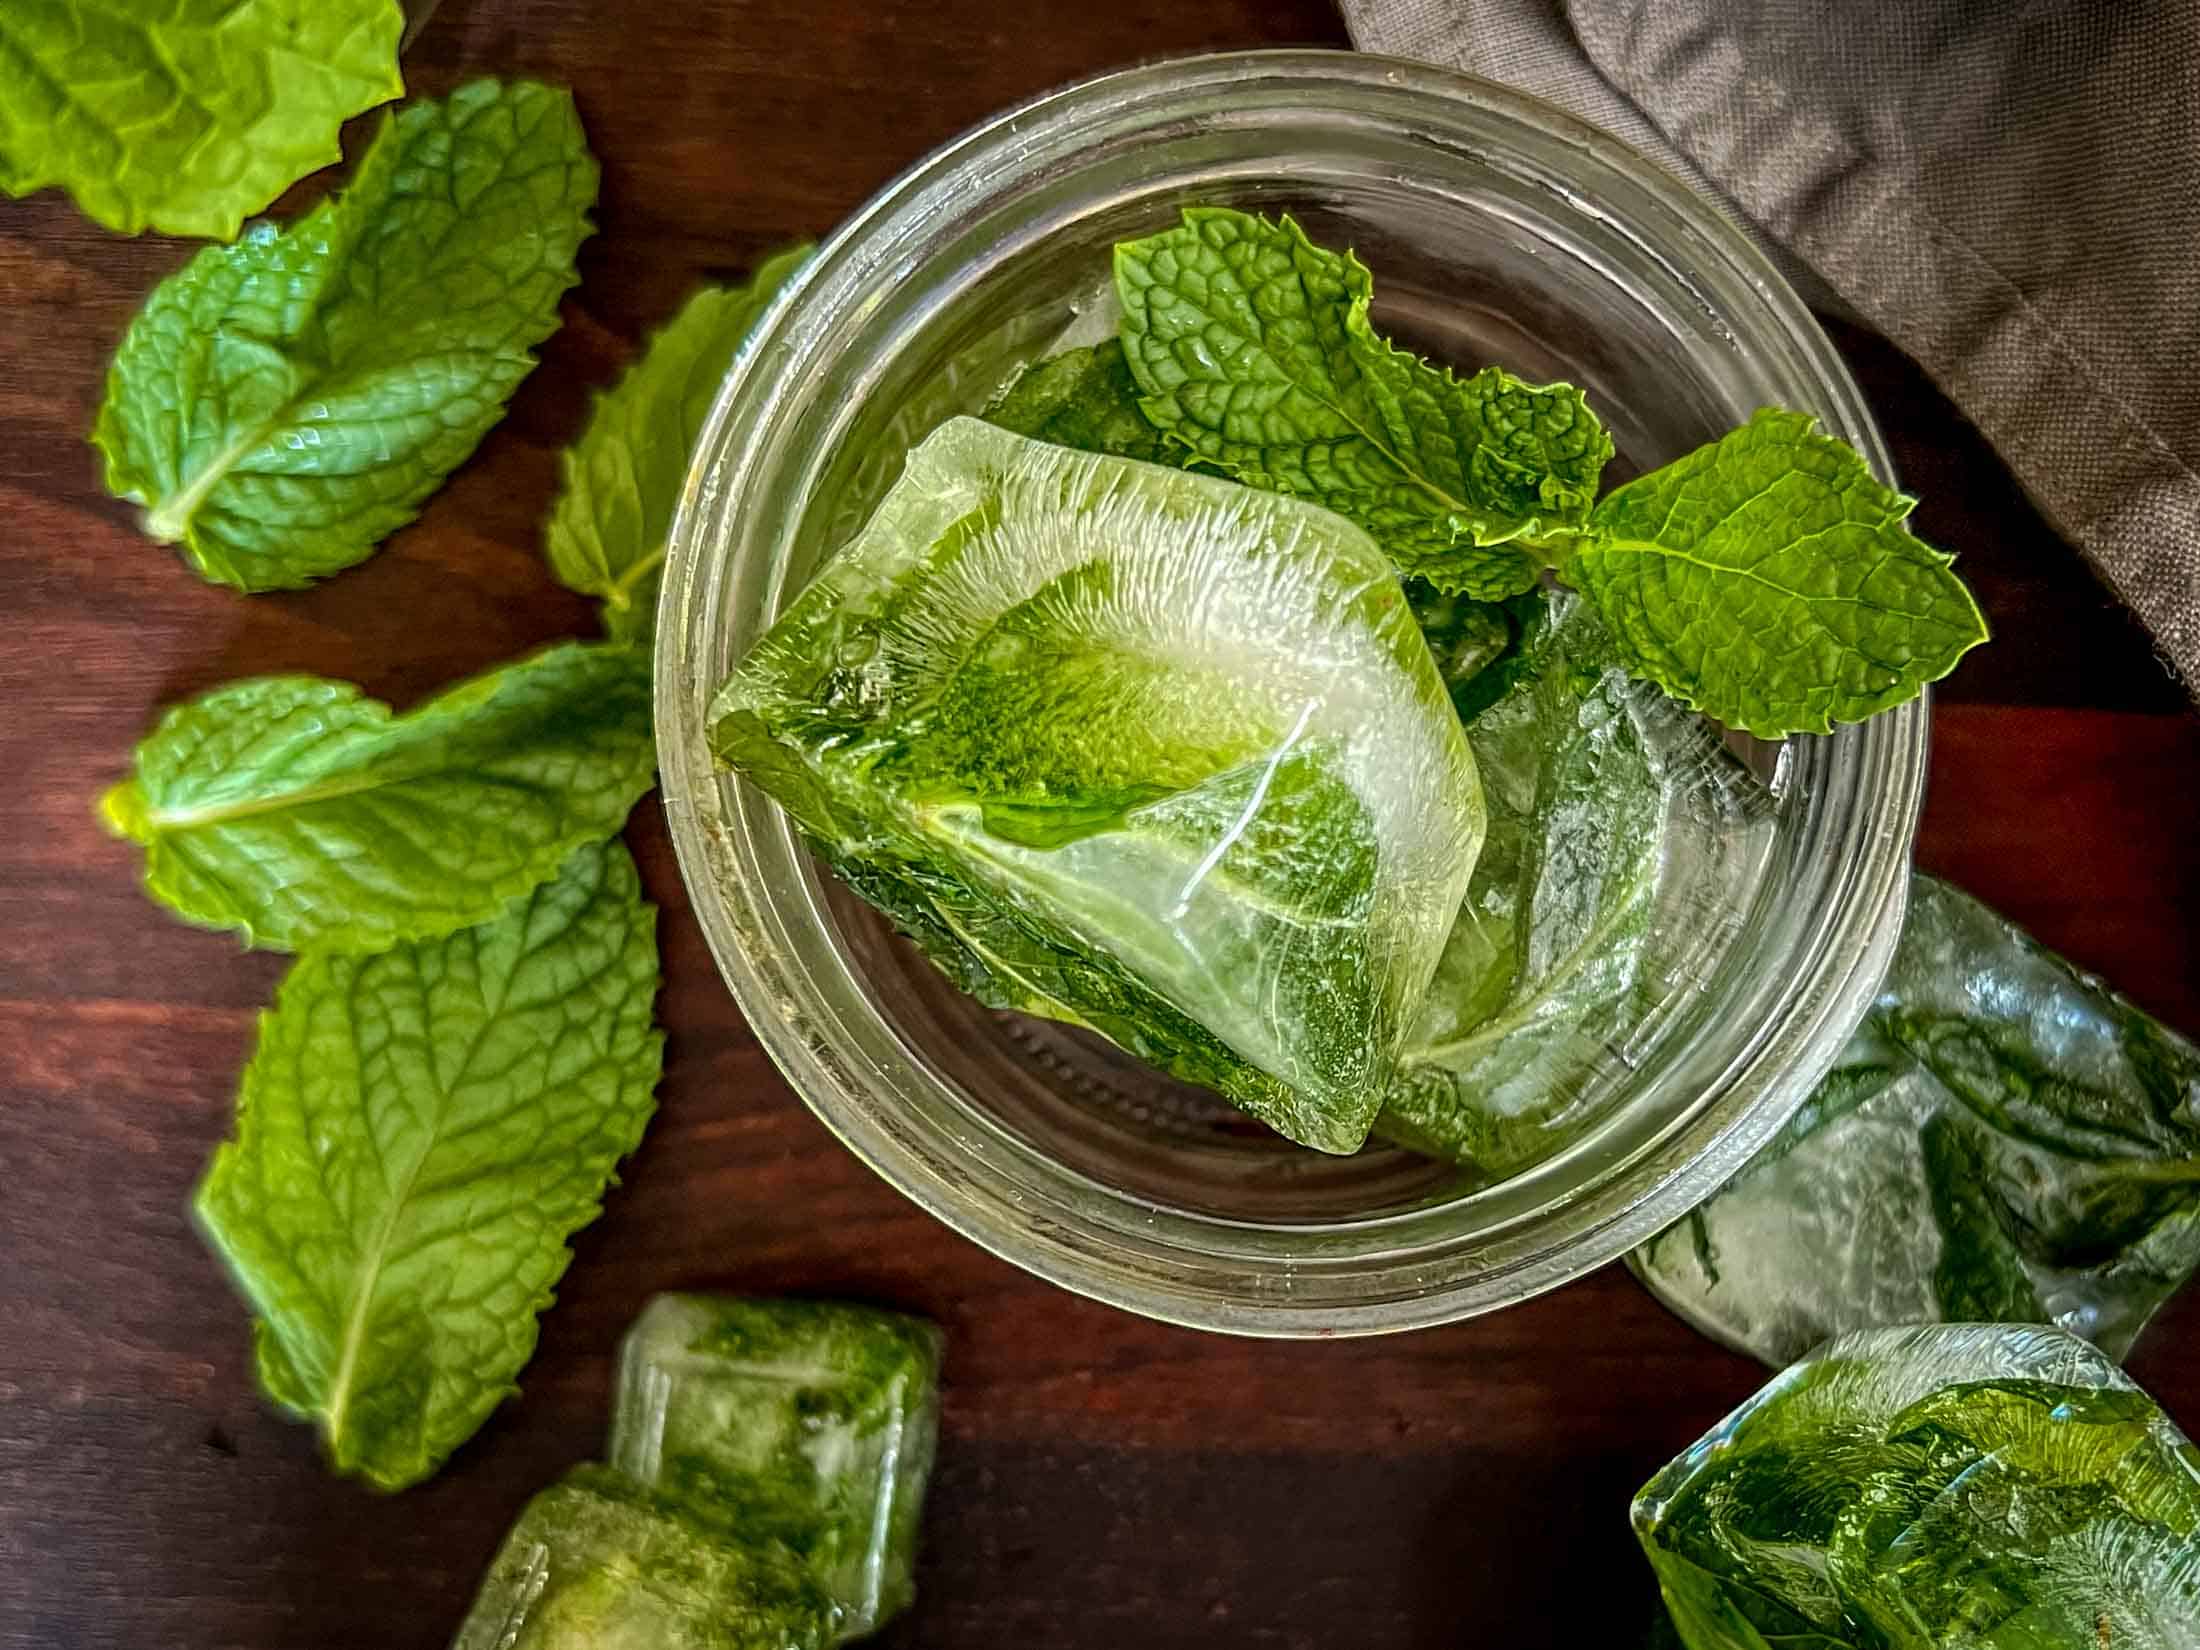 Frozen mint in ice cubes, with whole mint leaves frozen and chopped mint leaves frozen.